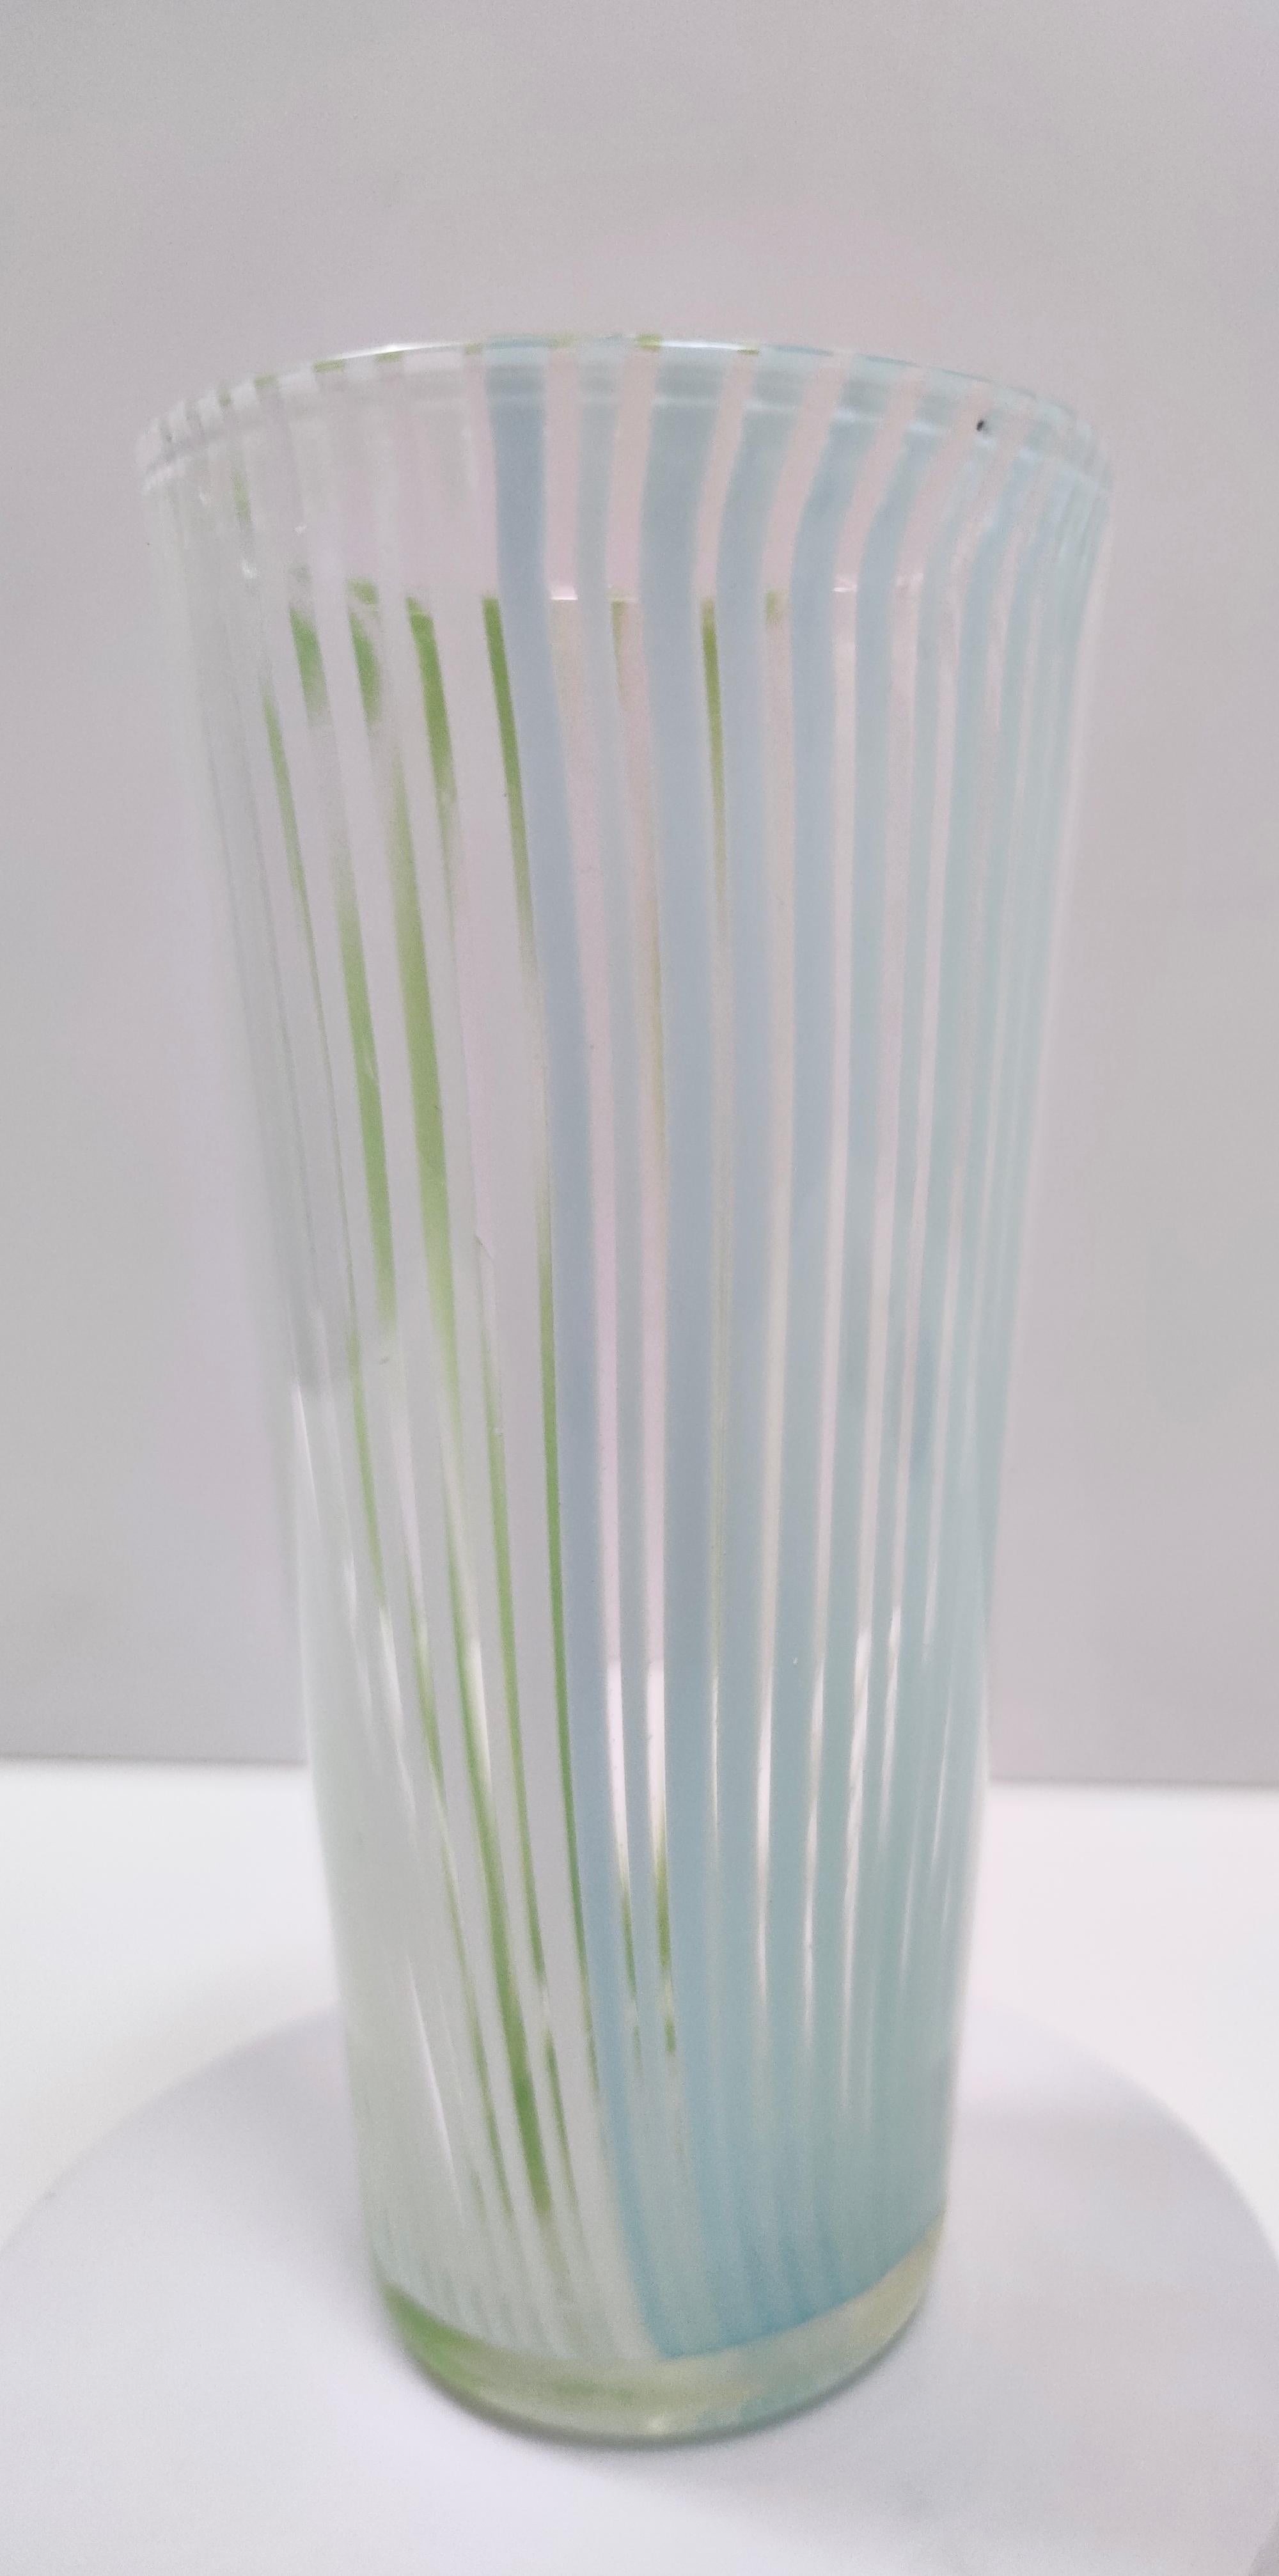 Italian Vintage Green, White and Light Blue Murano Glass Vase by Dino Martens For Sale